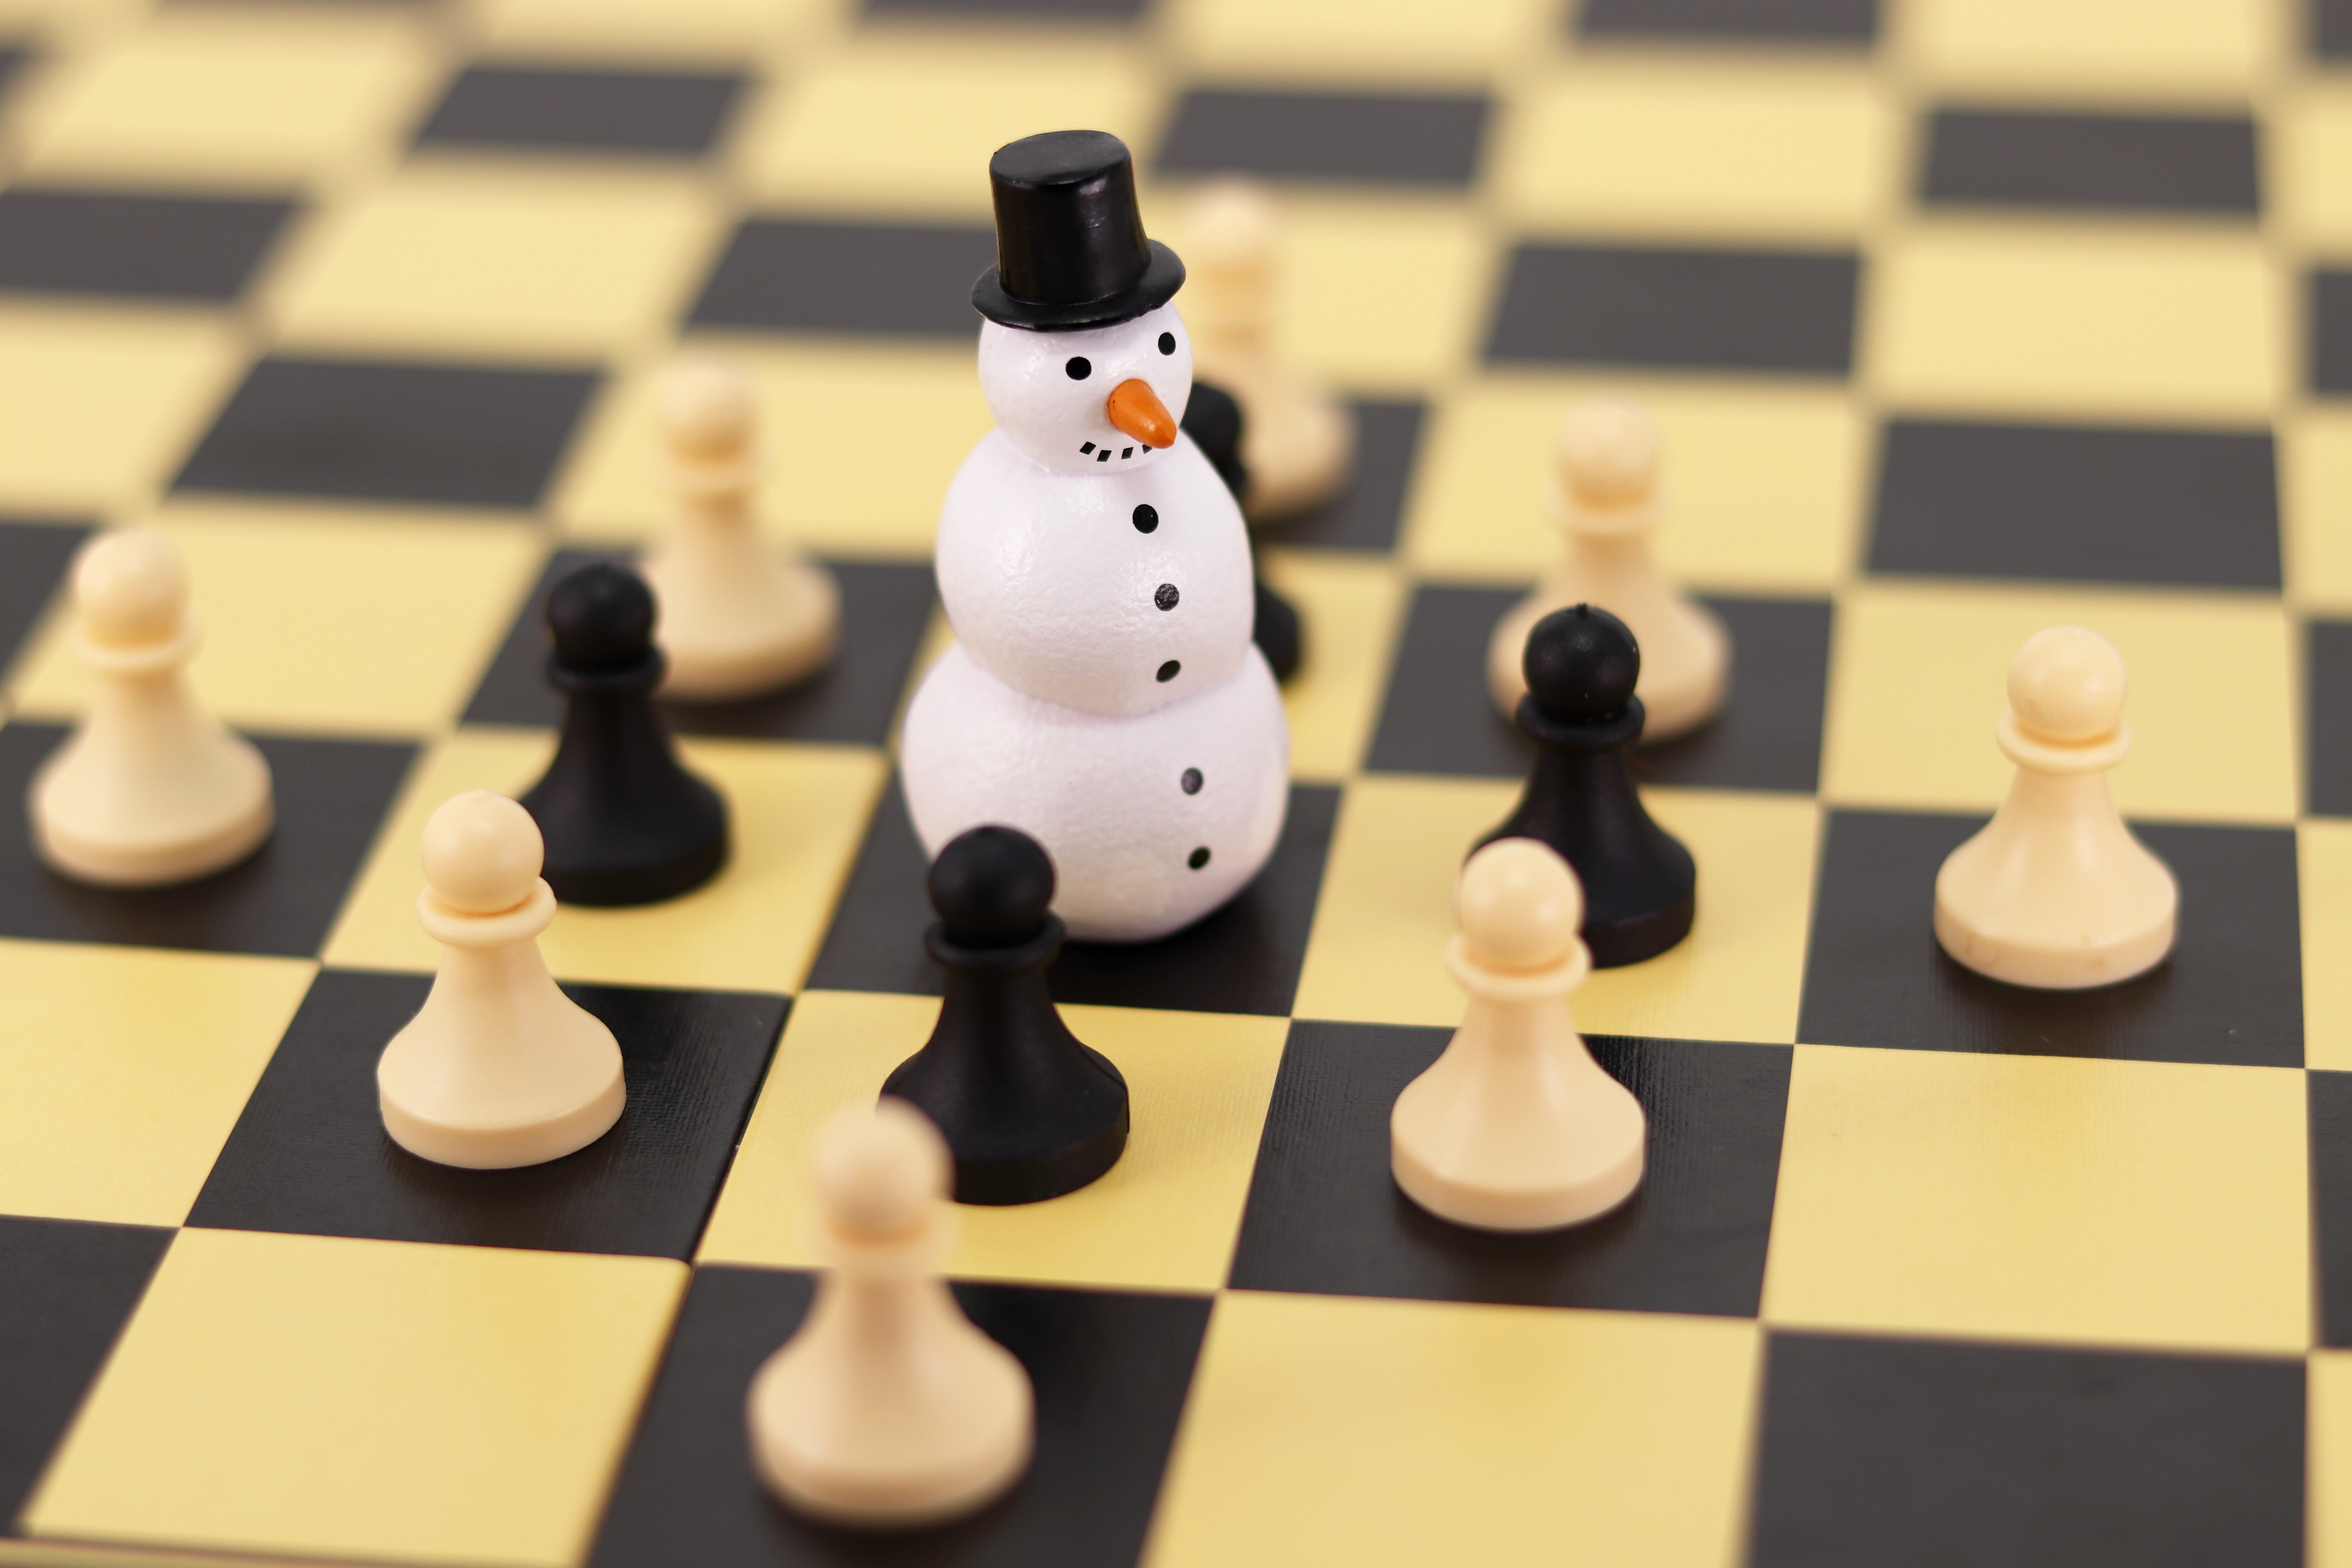 chess, snowman, miscellanea, miscellaneous, shapes, shape, game, chess board, chessboard, pawns for android